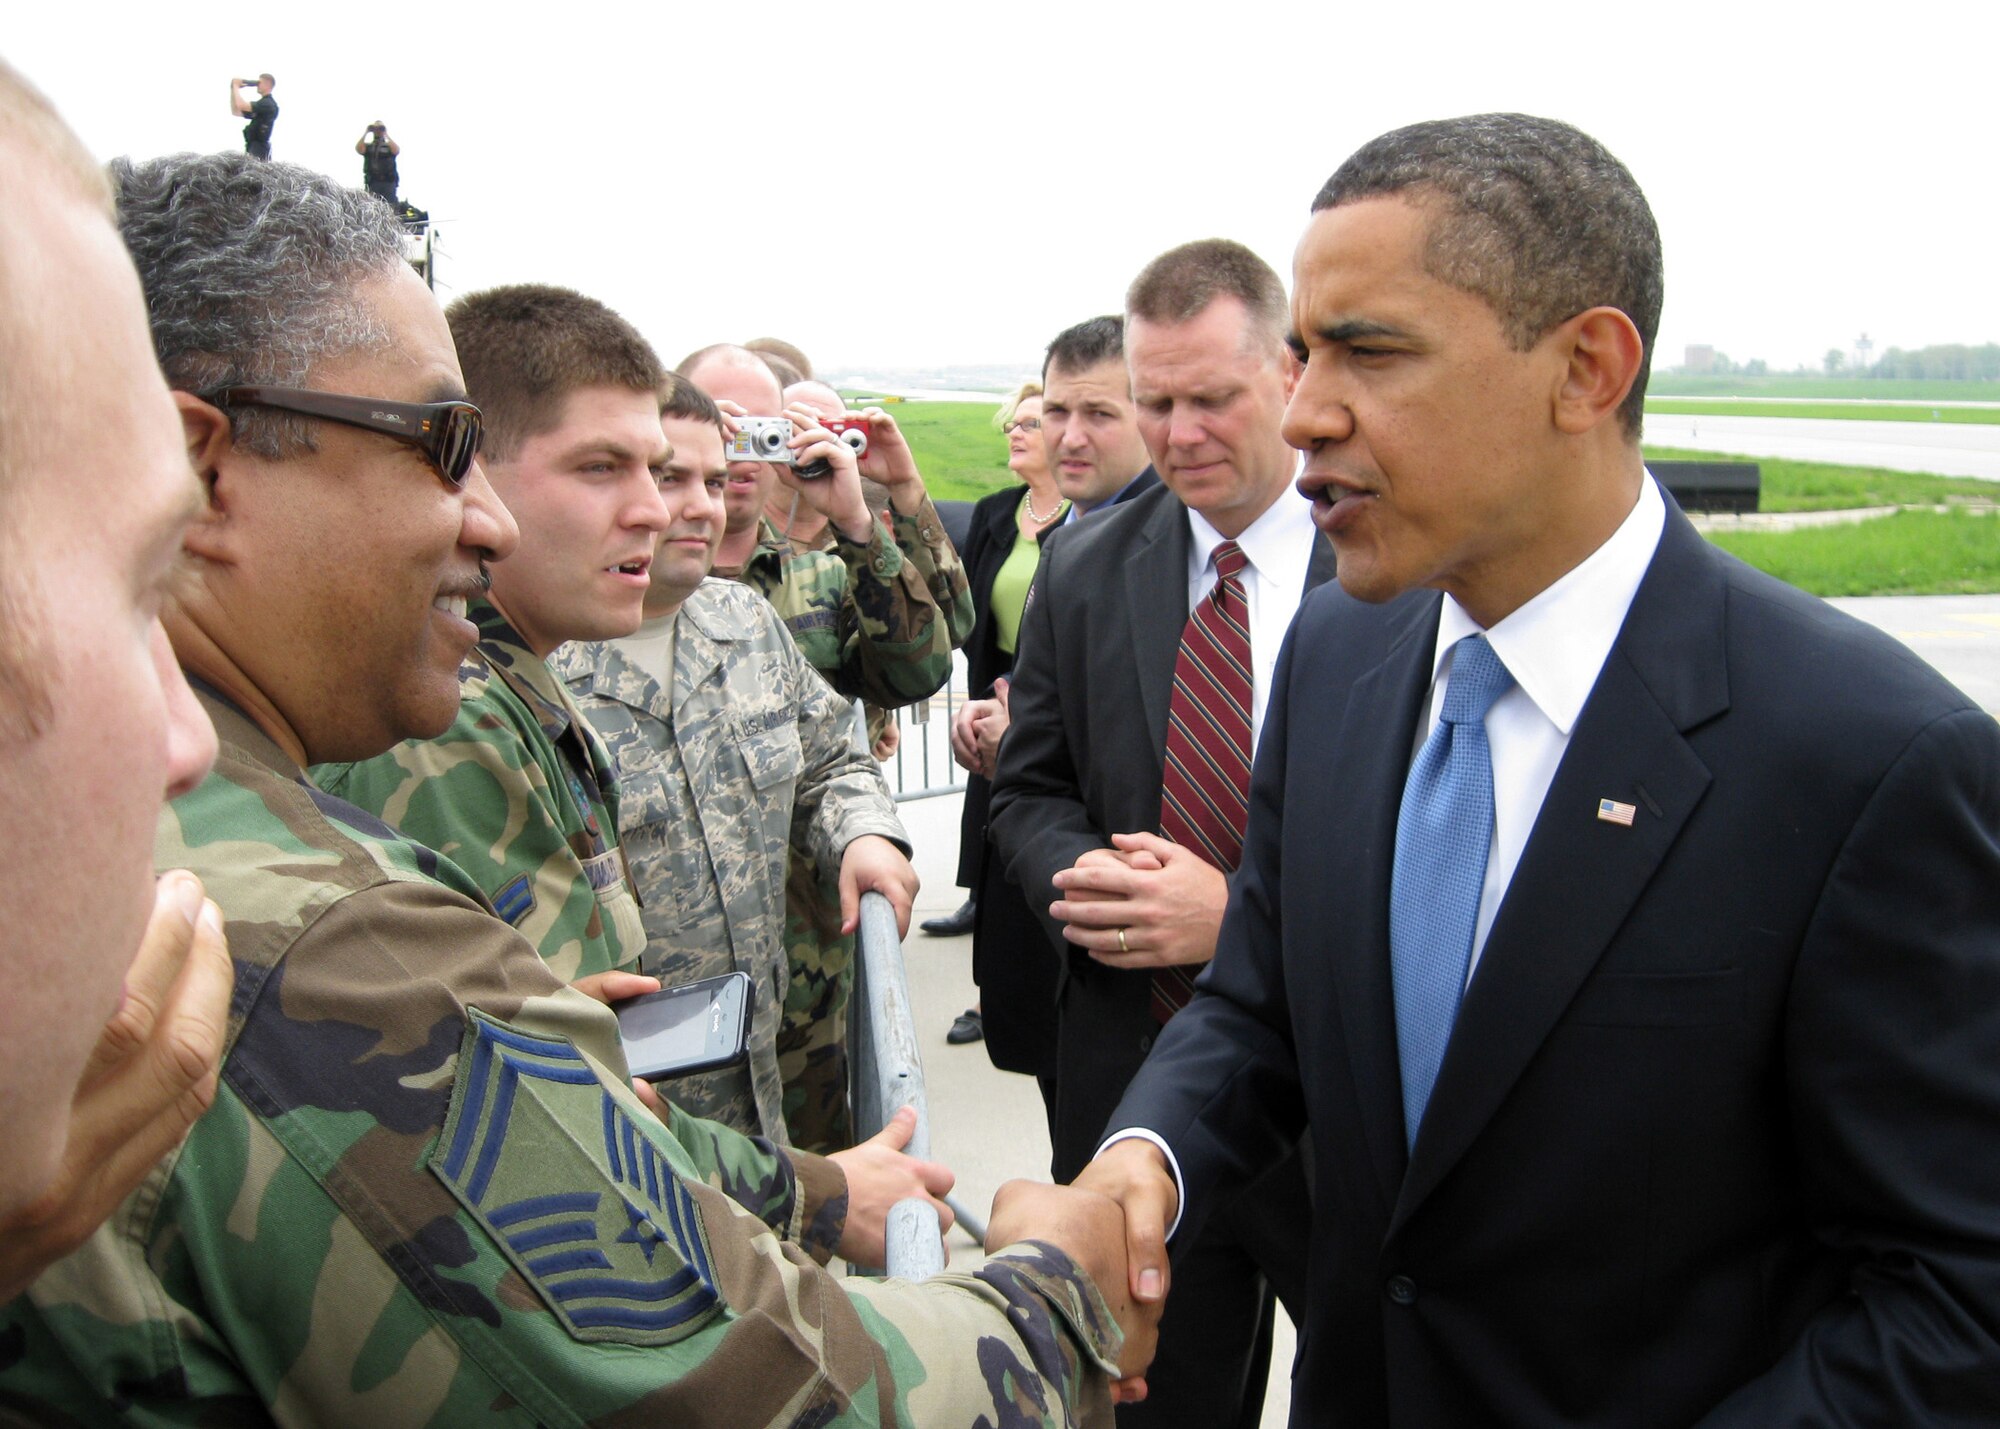 President Barack Obama greets a member of the 131st Fighter Wing, Missouri Air National Guard, at Lambert-Saint Louis International Airport prior to his departure on Air Force One on April 29.  President Obama marked his 100th day in office with a Town Hall Meeting in Arnold, a surburb of Saint Louis, earlier that day. (U.S. Air Force Photo by Lorenzo "Skip" Doyle)  (RELEASED)